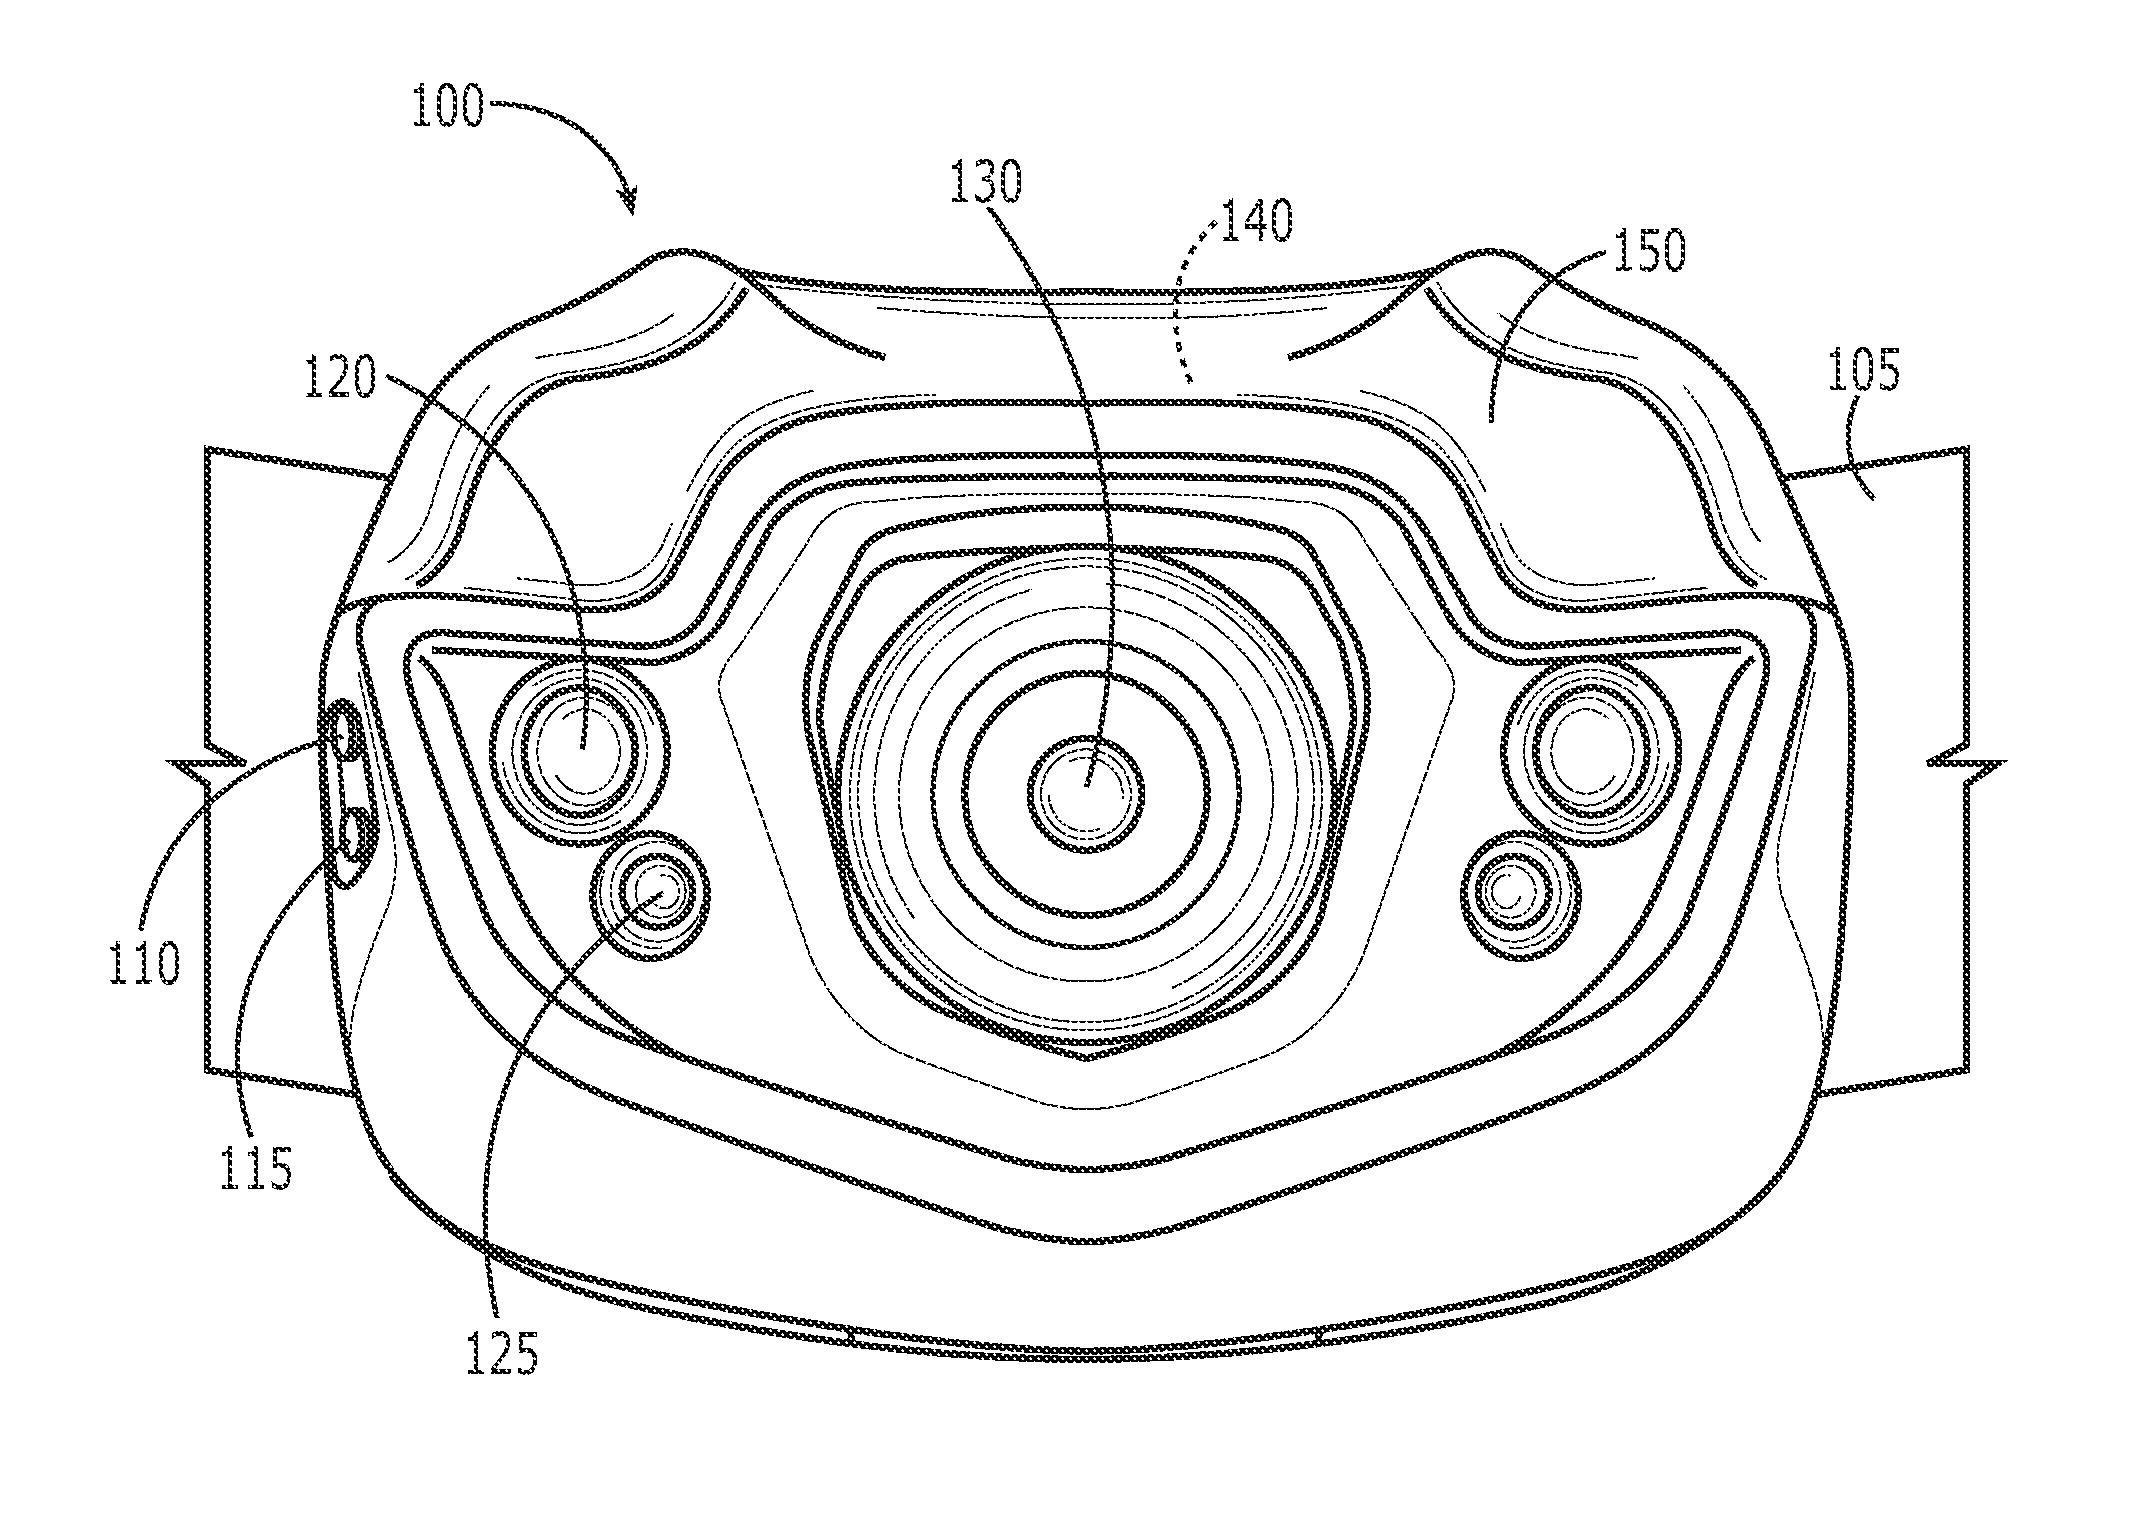 Systems and methods for locking a portable illumination system